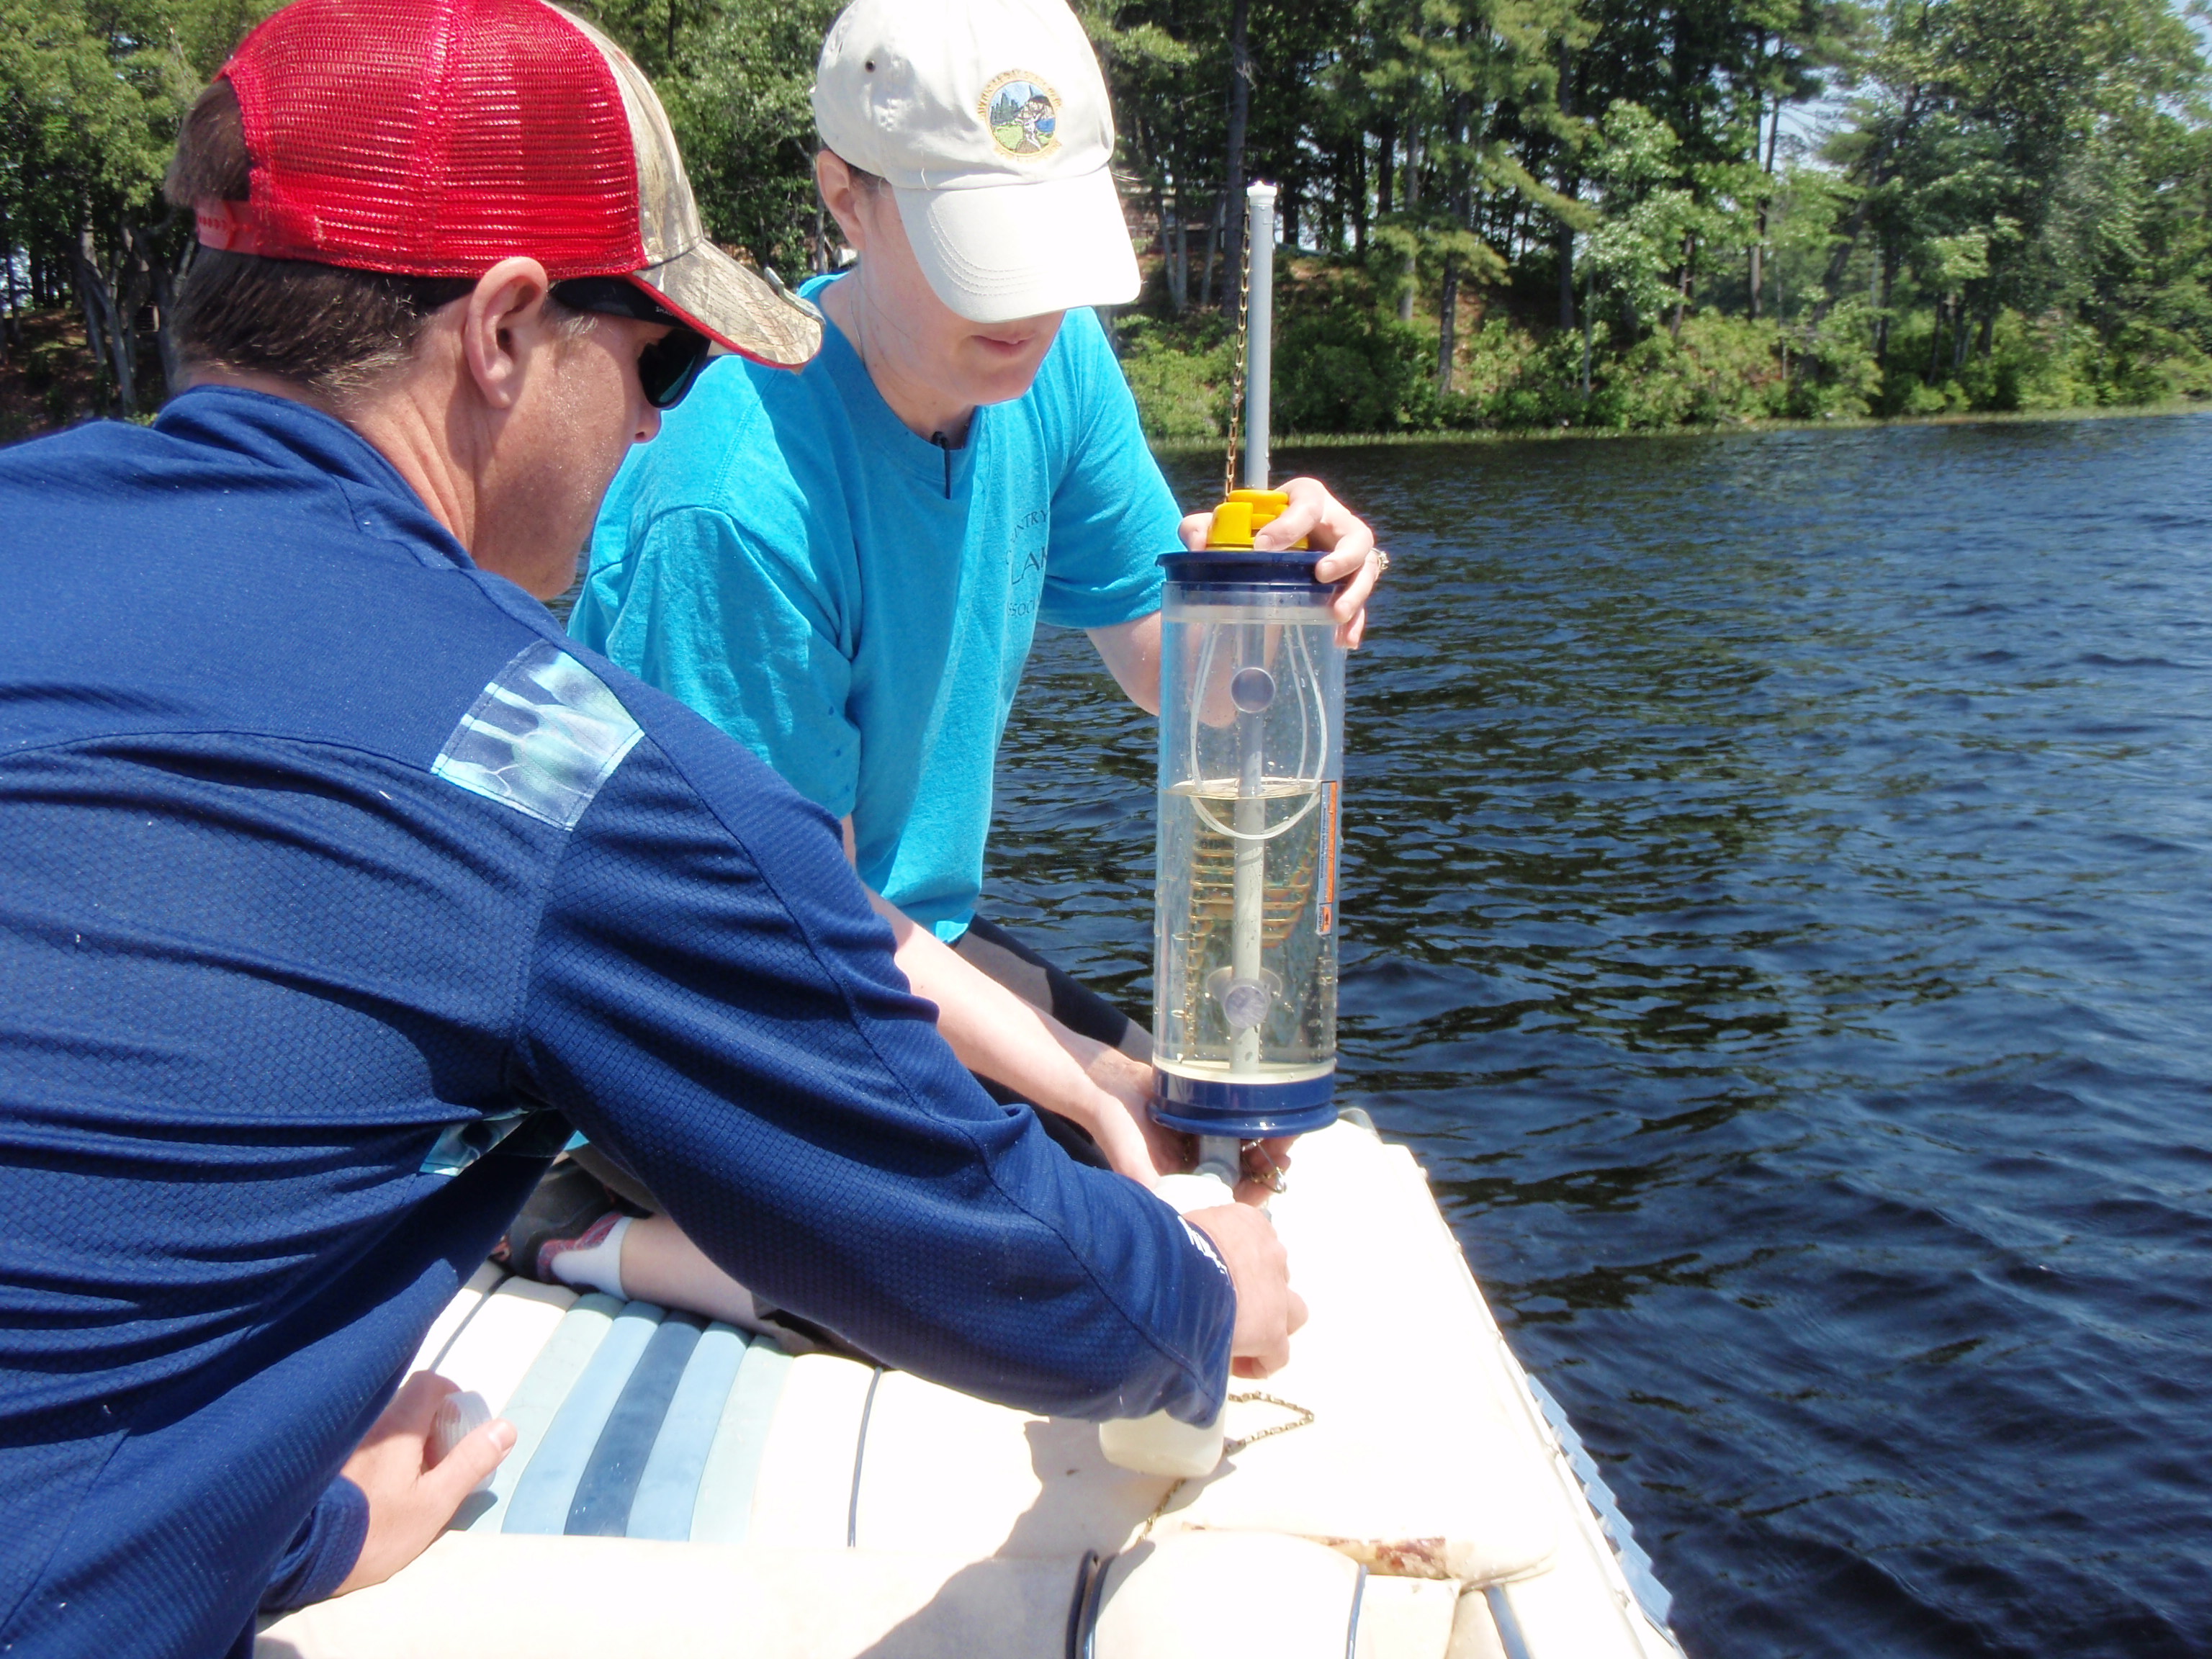 Two volunteers collect water samples from a lake.